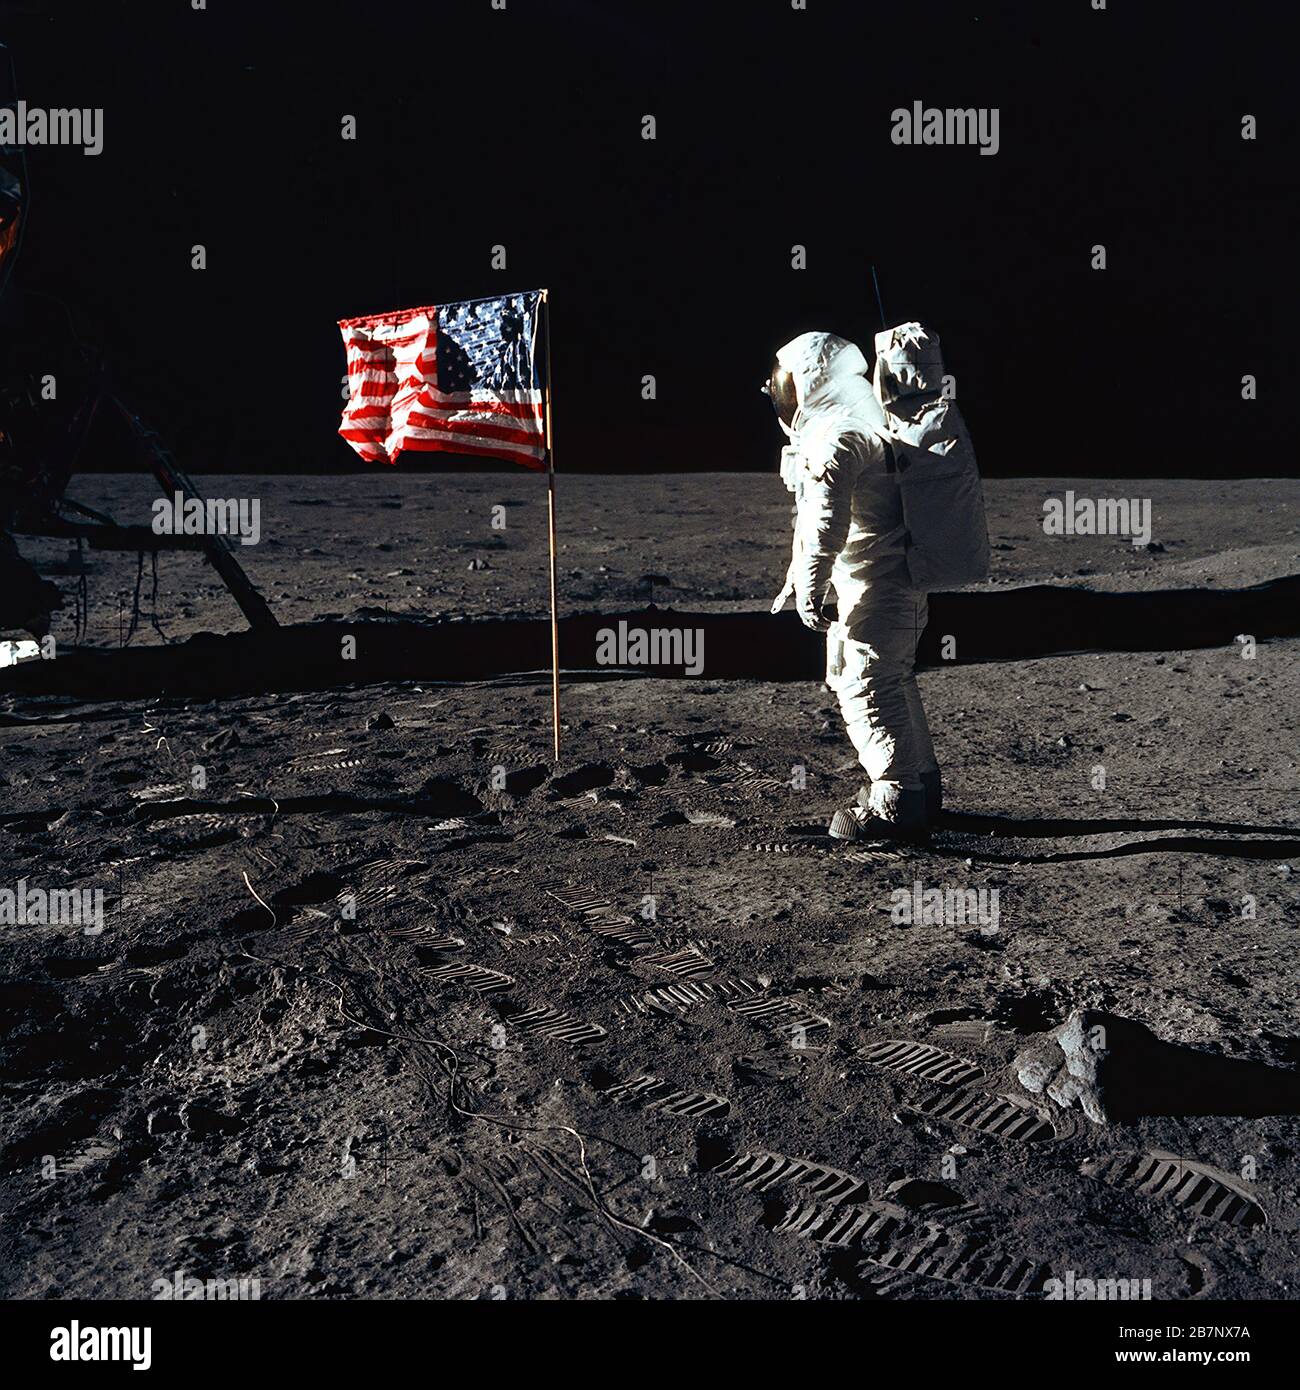 Apollo 11 - NASA, 1969. Astronaut Edwin E. &quot;Buzz&quot; Aldrin, Jr., beside the U.S. flag during an Apollo 11 moon walk. The Lunar Module (LM) is on the left, and the footprints of the astronauts are clearly visible in the soil of the moon. Astronaut Neil A. Armstrong, commander, took this picture with a 70mm Hasselblad lunar surface camera. Stock Photo